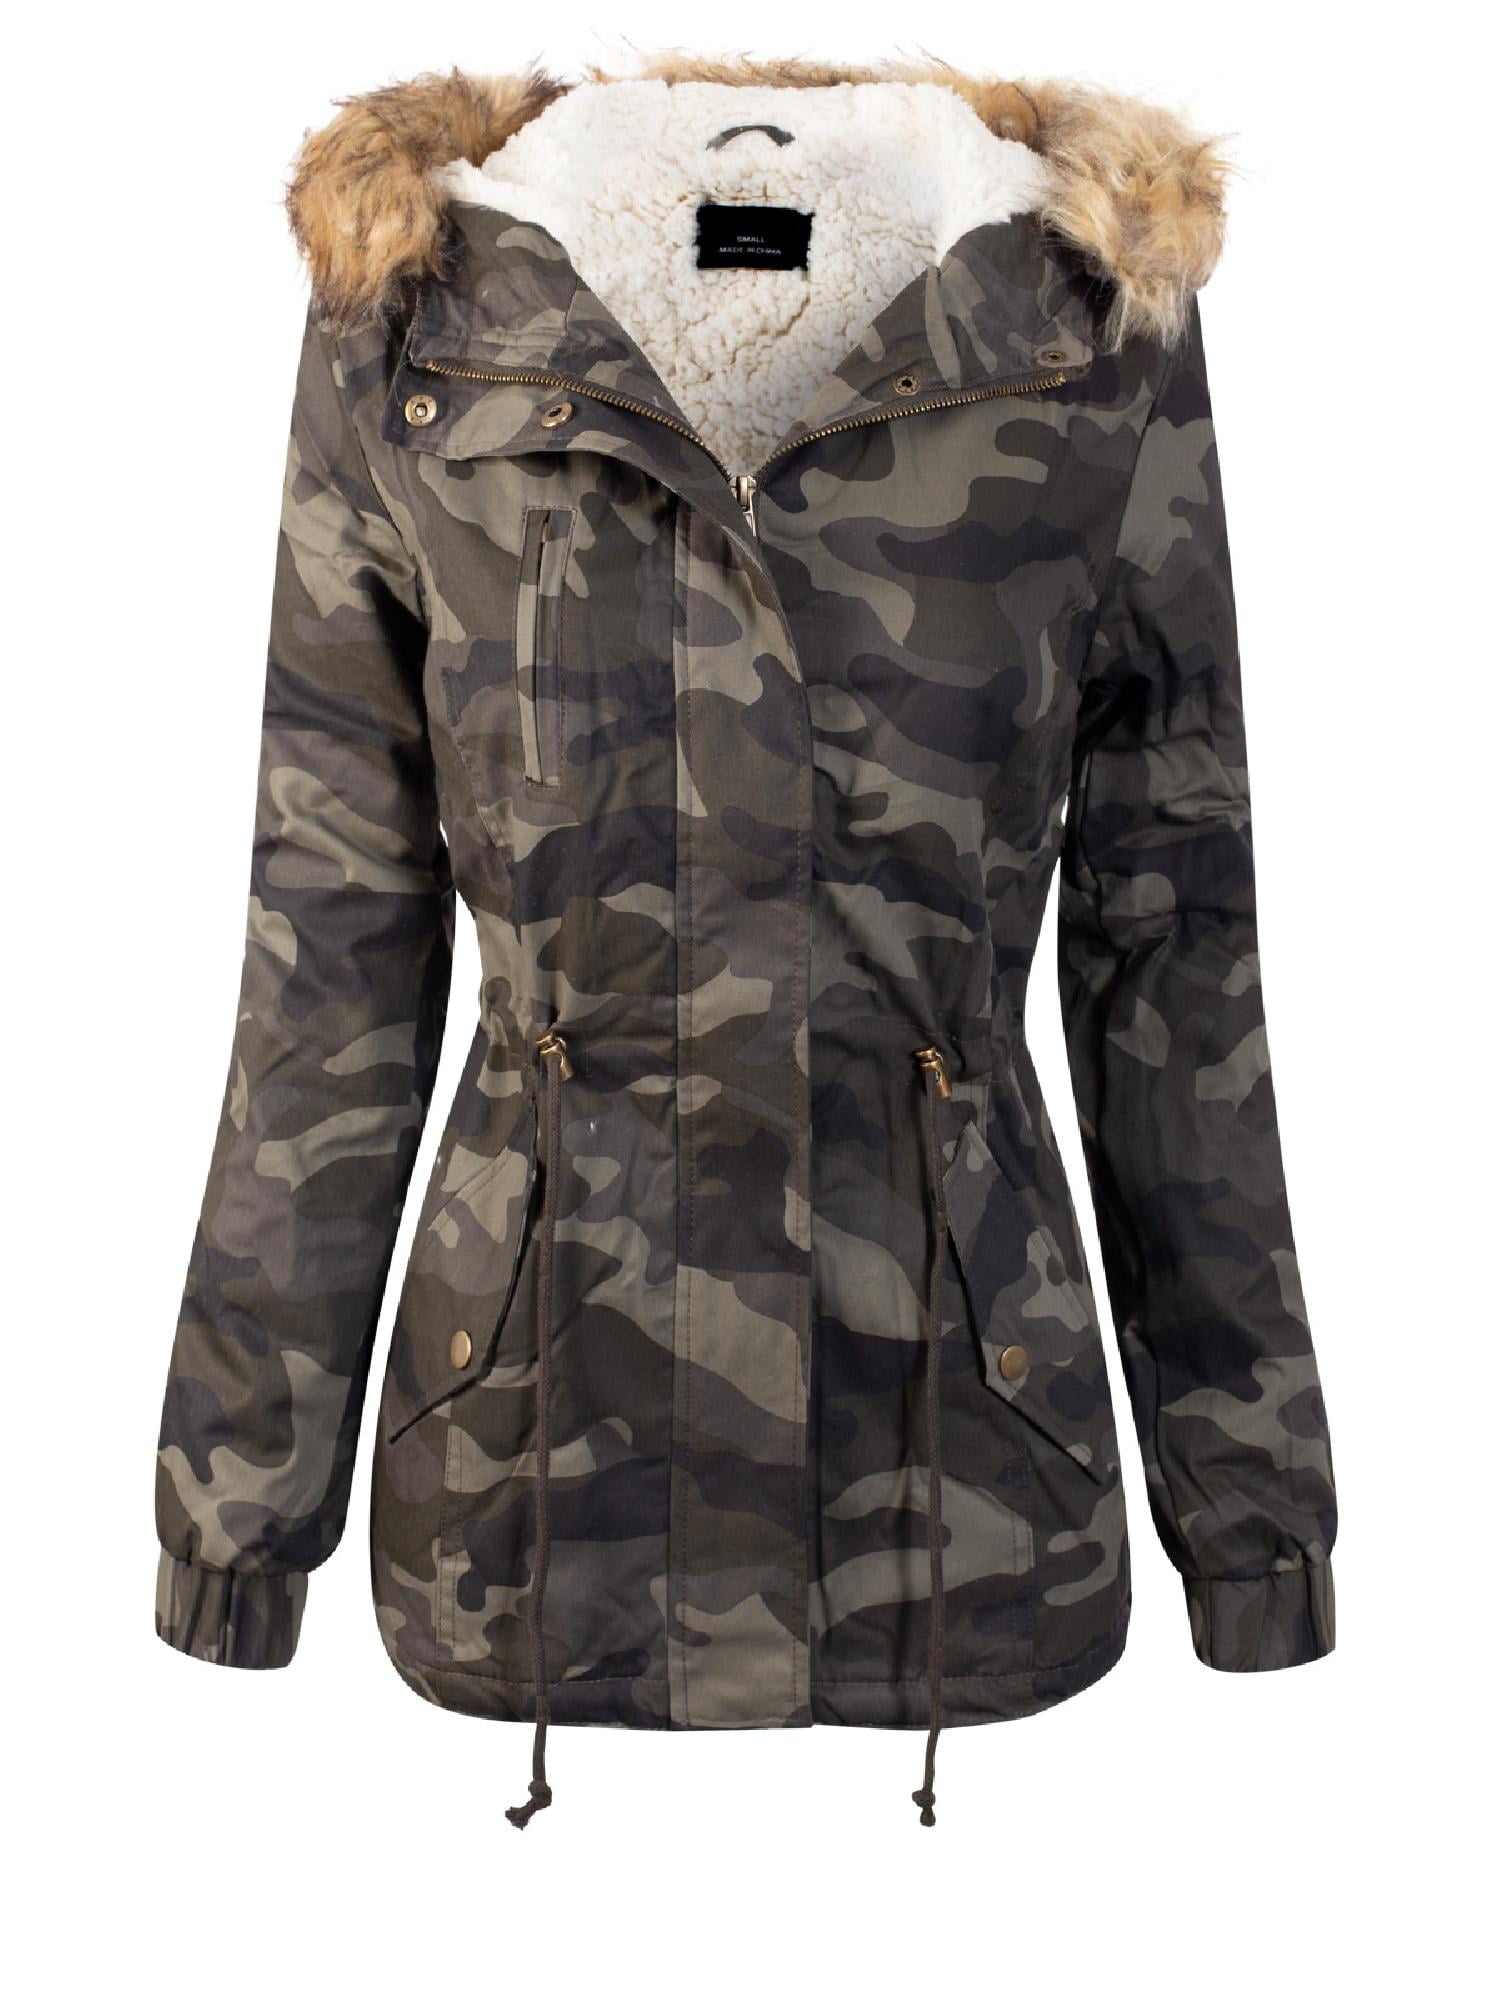 Design by Olivia Womens Camouflage Sherpa Lined Hooded Military Safari Utility Fashion Jacket 